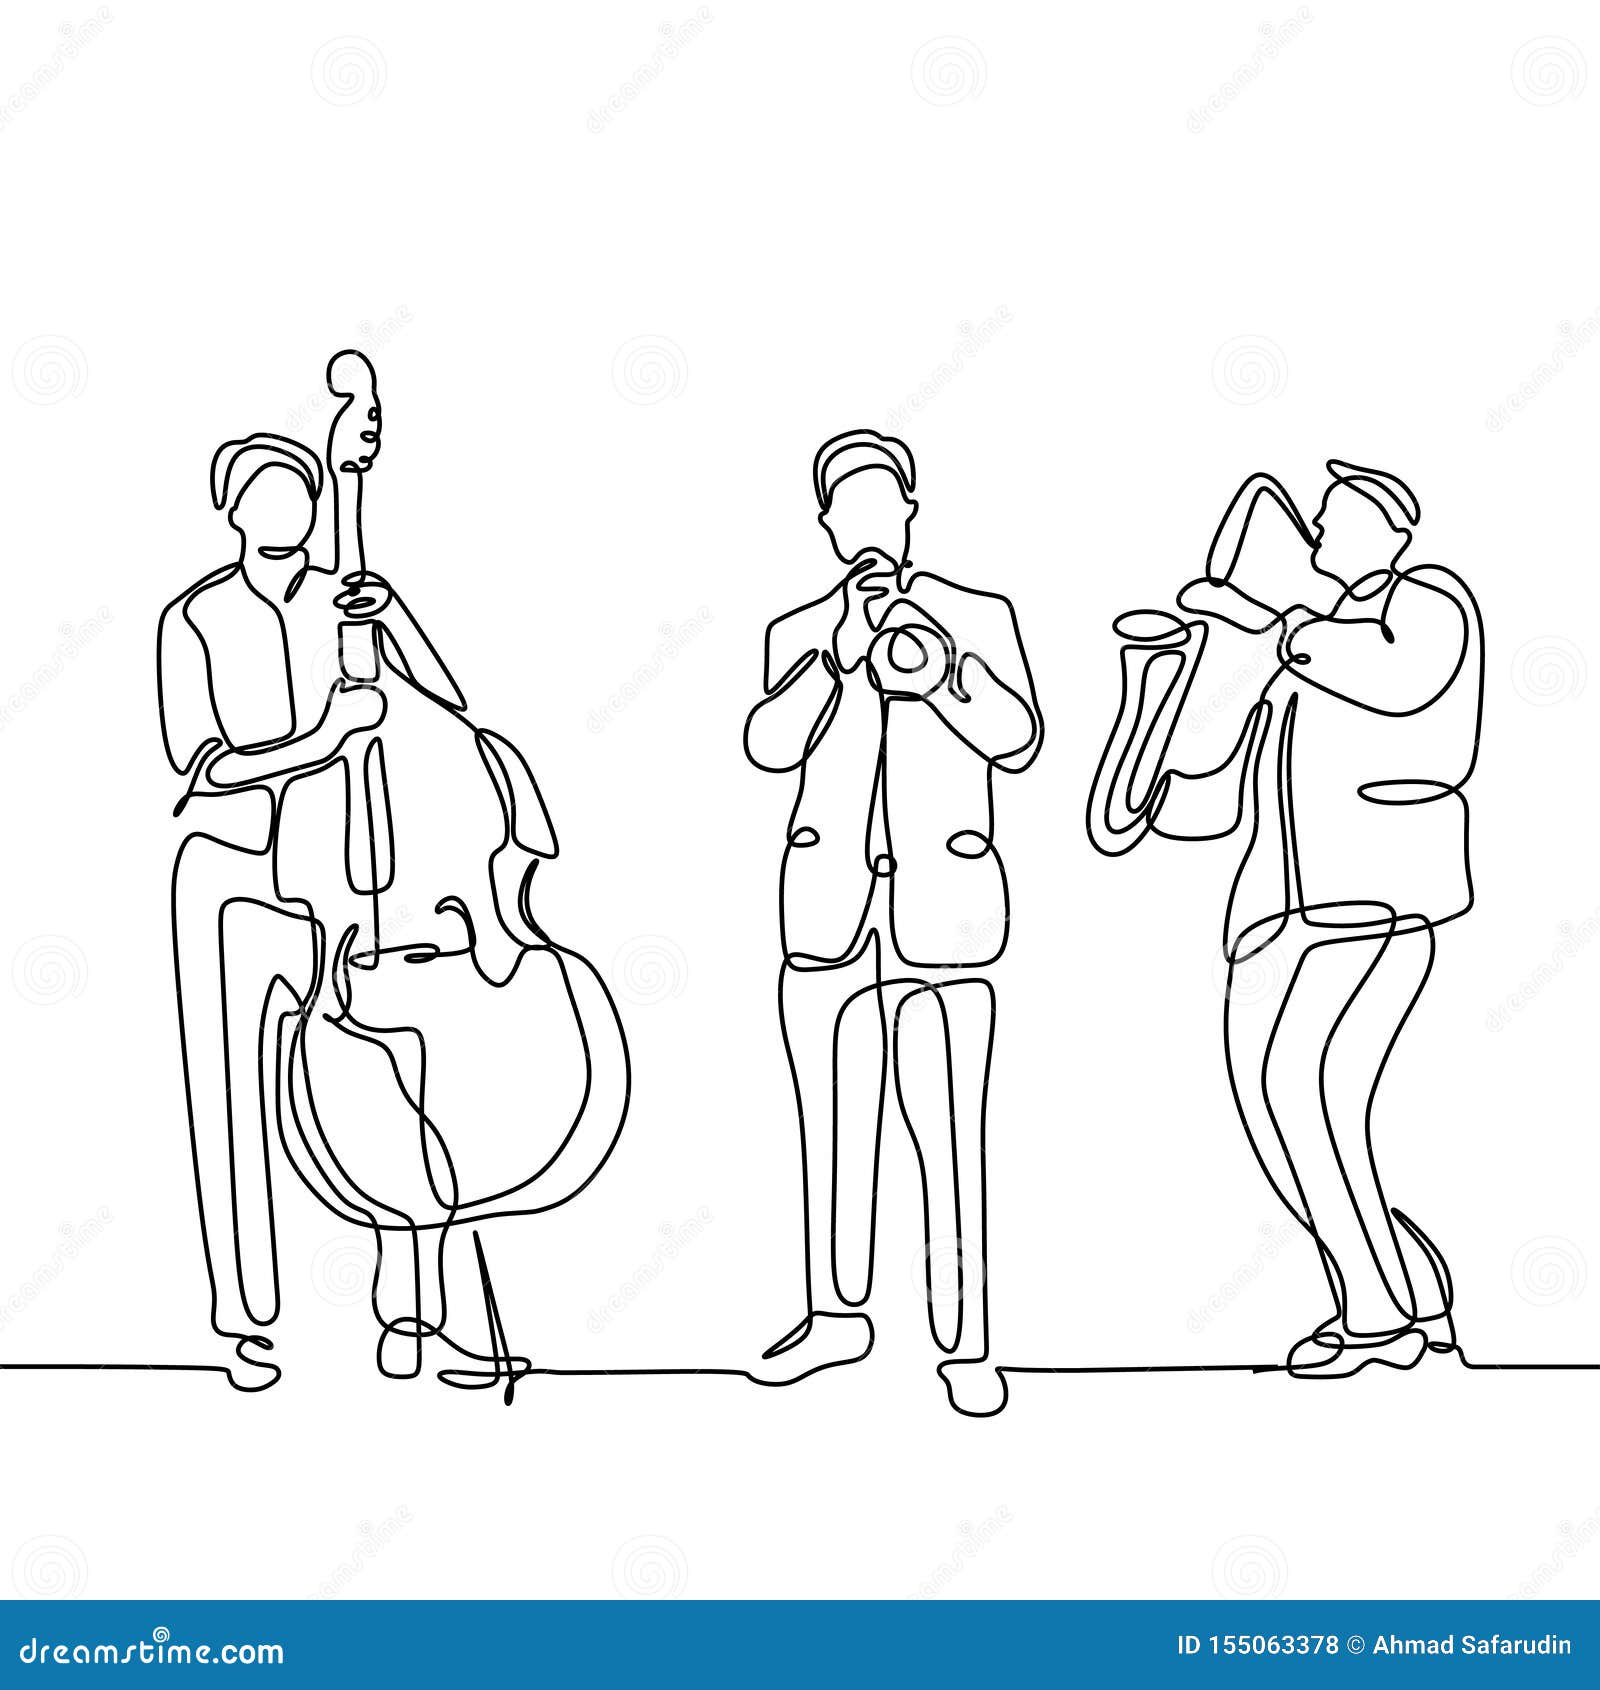 Sketch #4 by Lennie Niehaus from 10 Jazz Sketches - YouTube